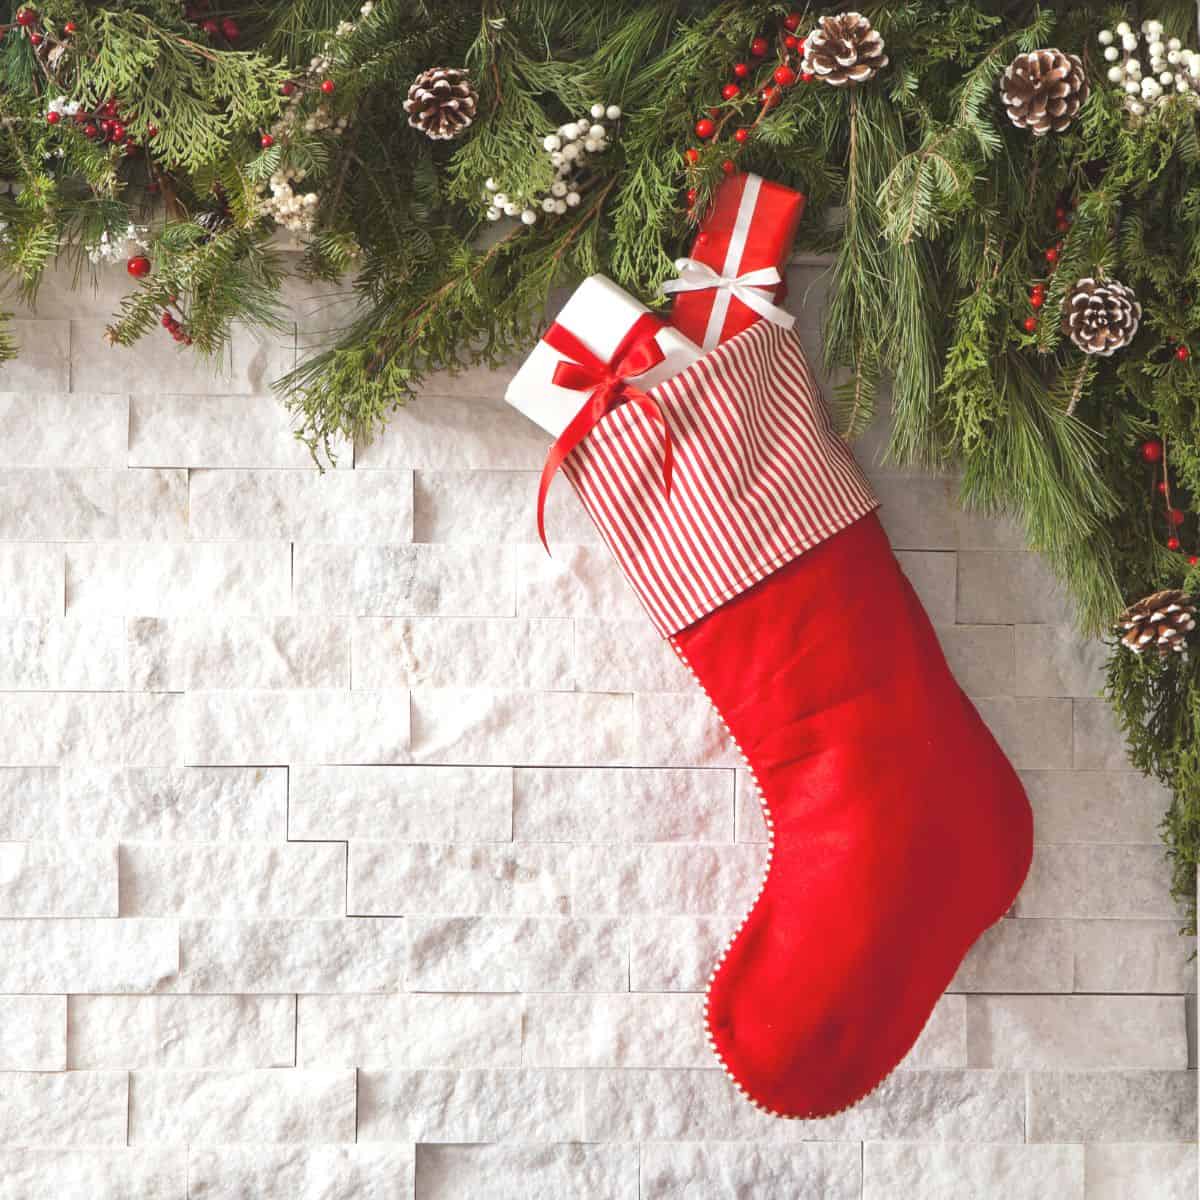 How to Make a Lined Christmas Stocking